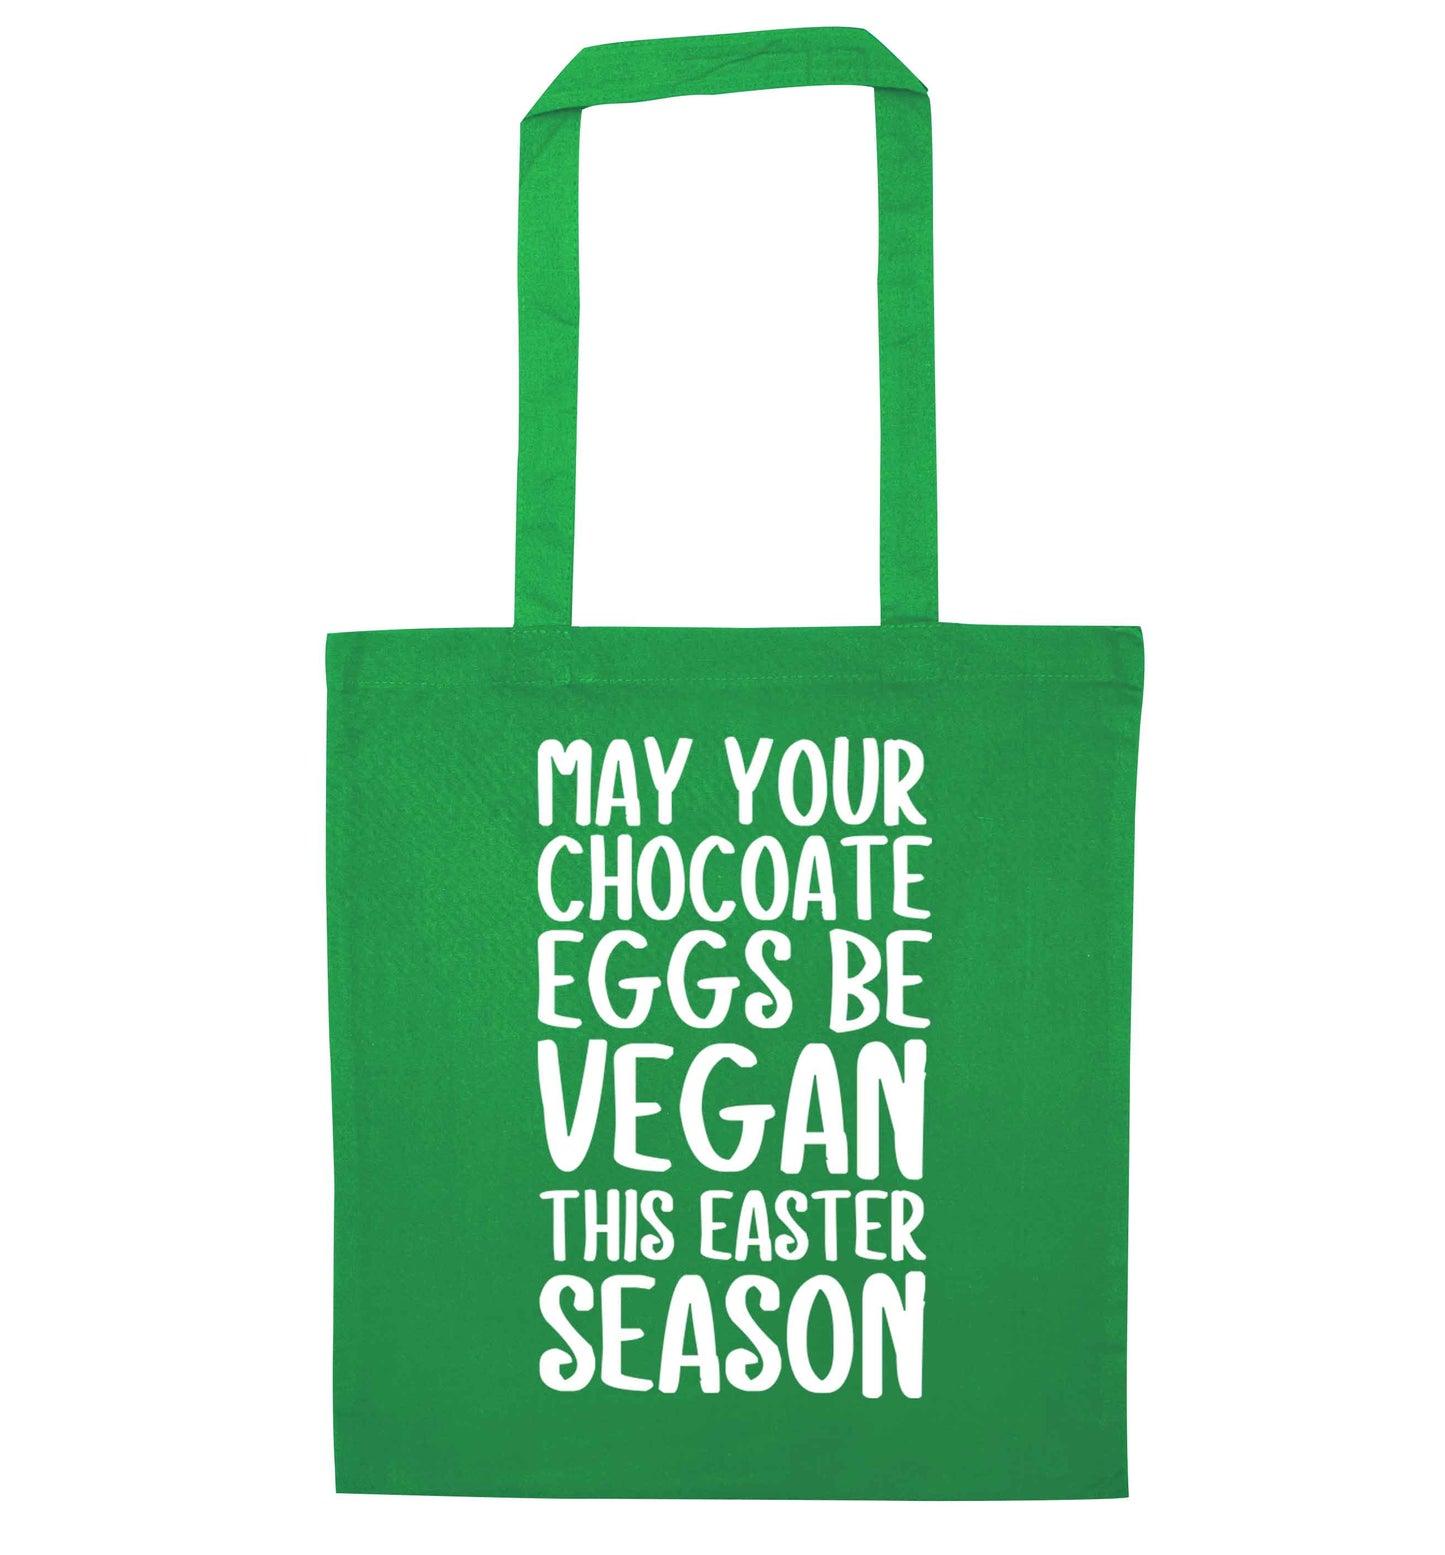 Easter bunny approved! Vegans will love this easter themed green tote bag